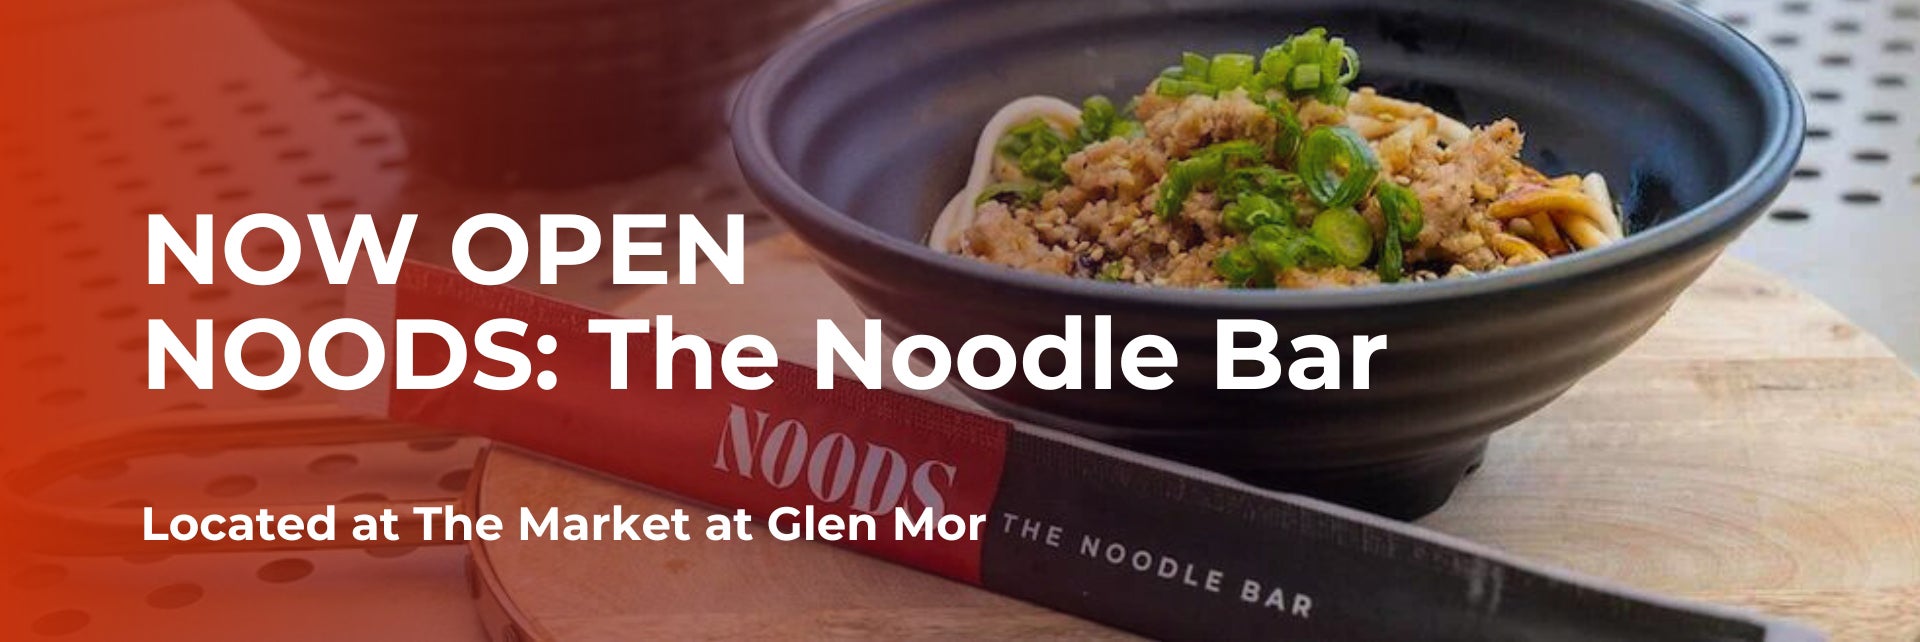 Now Open, Noods: The Noodle Bar, Located at The Market at Glen Mor